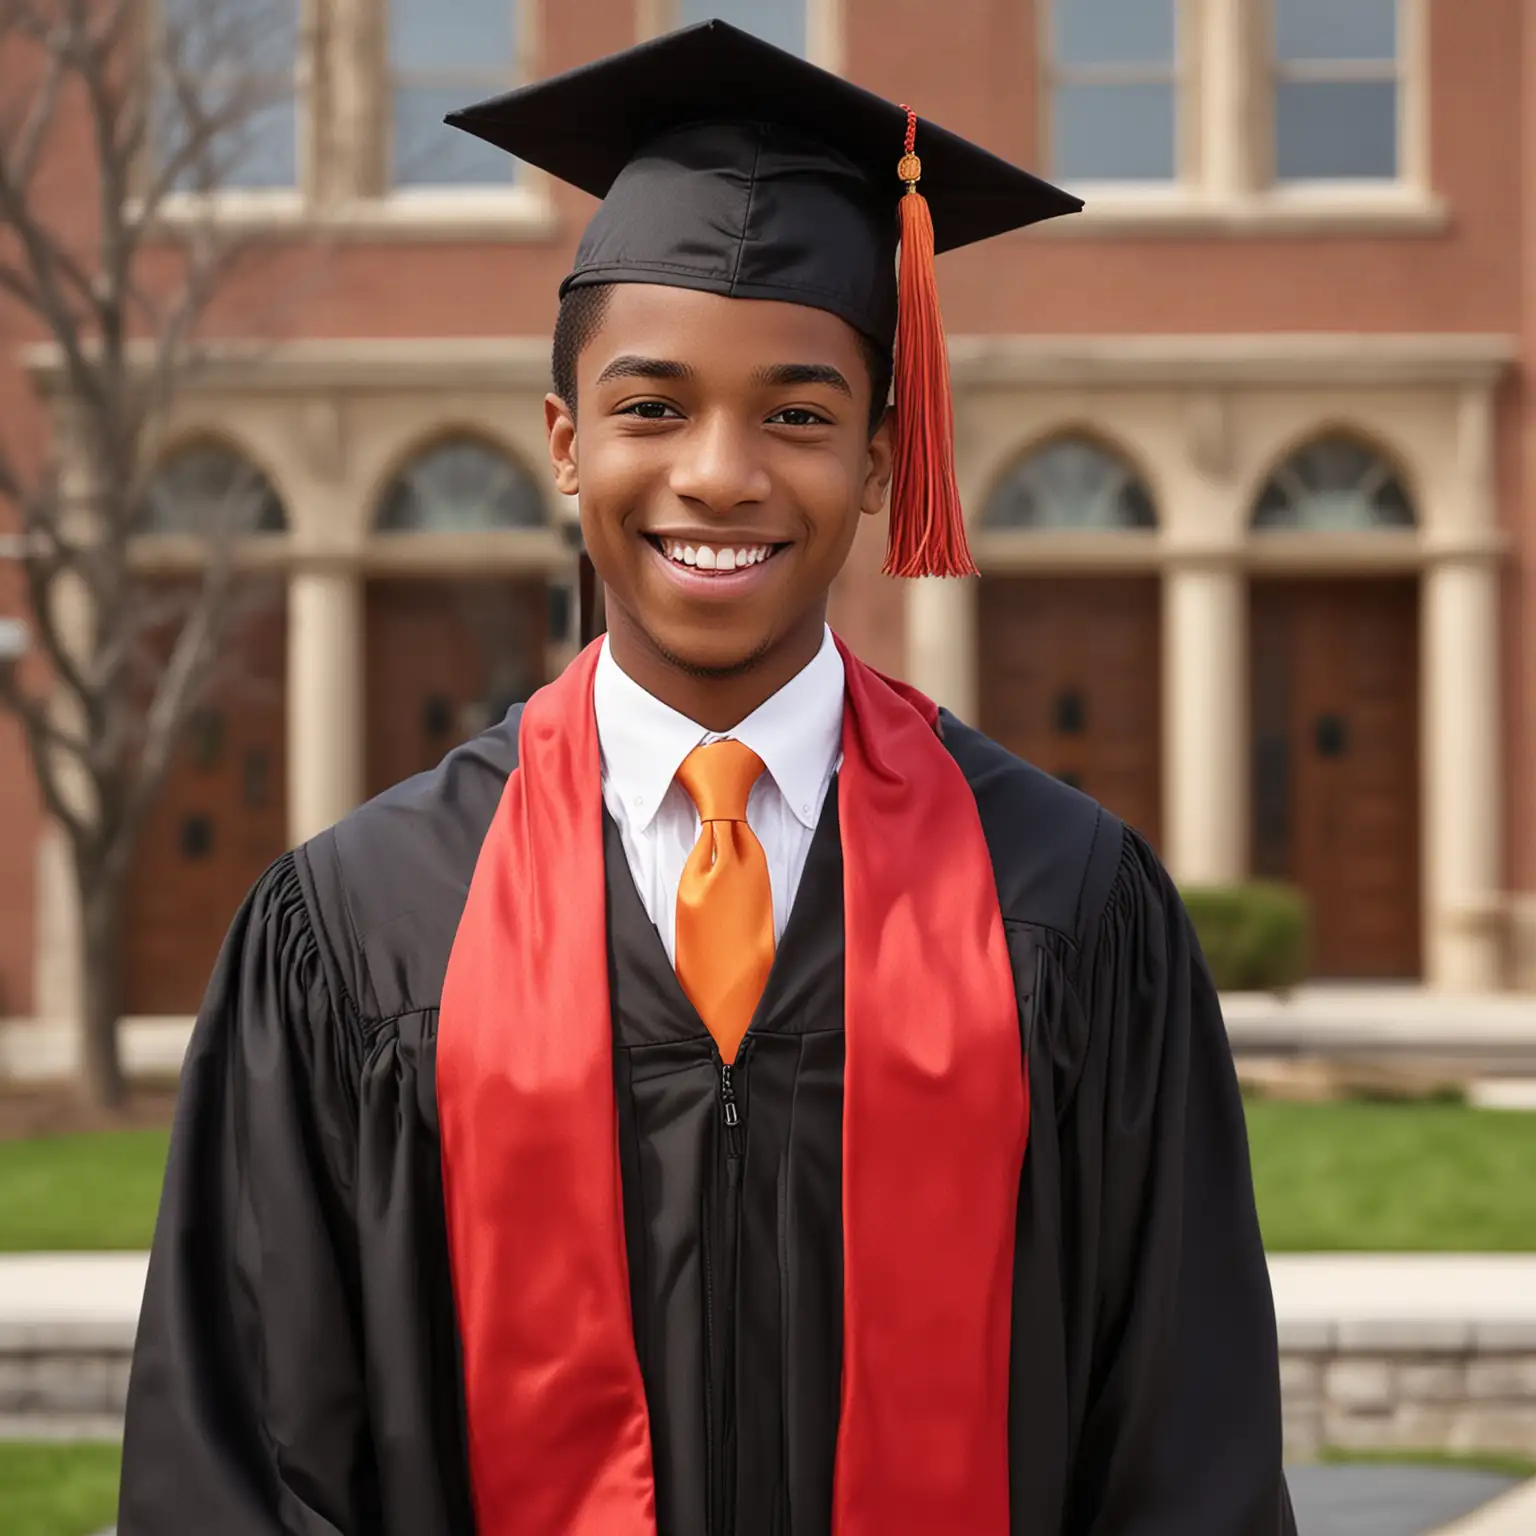 Create a african americn young man wearing a graduation cap and gown. He has a beaming smile and is donning a black gown with a red stole and an orange tie. The tassel on his cap also appears to be red, suggesting a celebratory occasion like a commencement ceremony. The background hints at an academic setting, possibly a college or university campus.